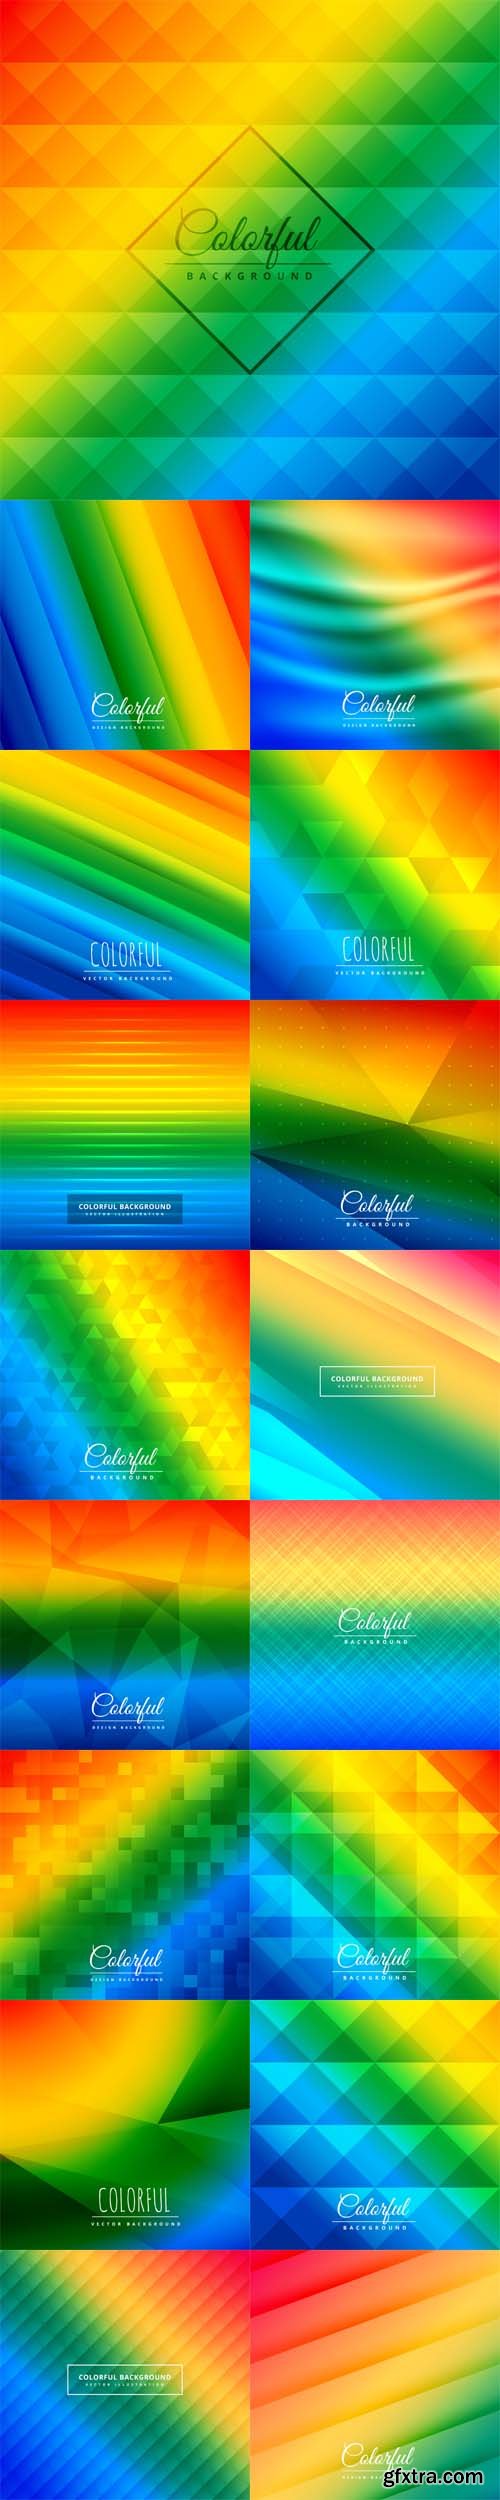 Vector Set - Abstract Colorful Backgrounds with Triangle Patterns